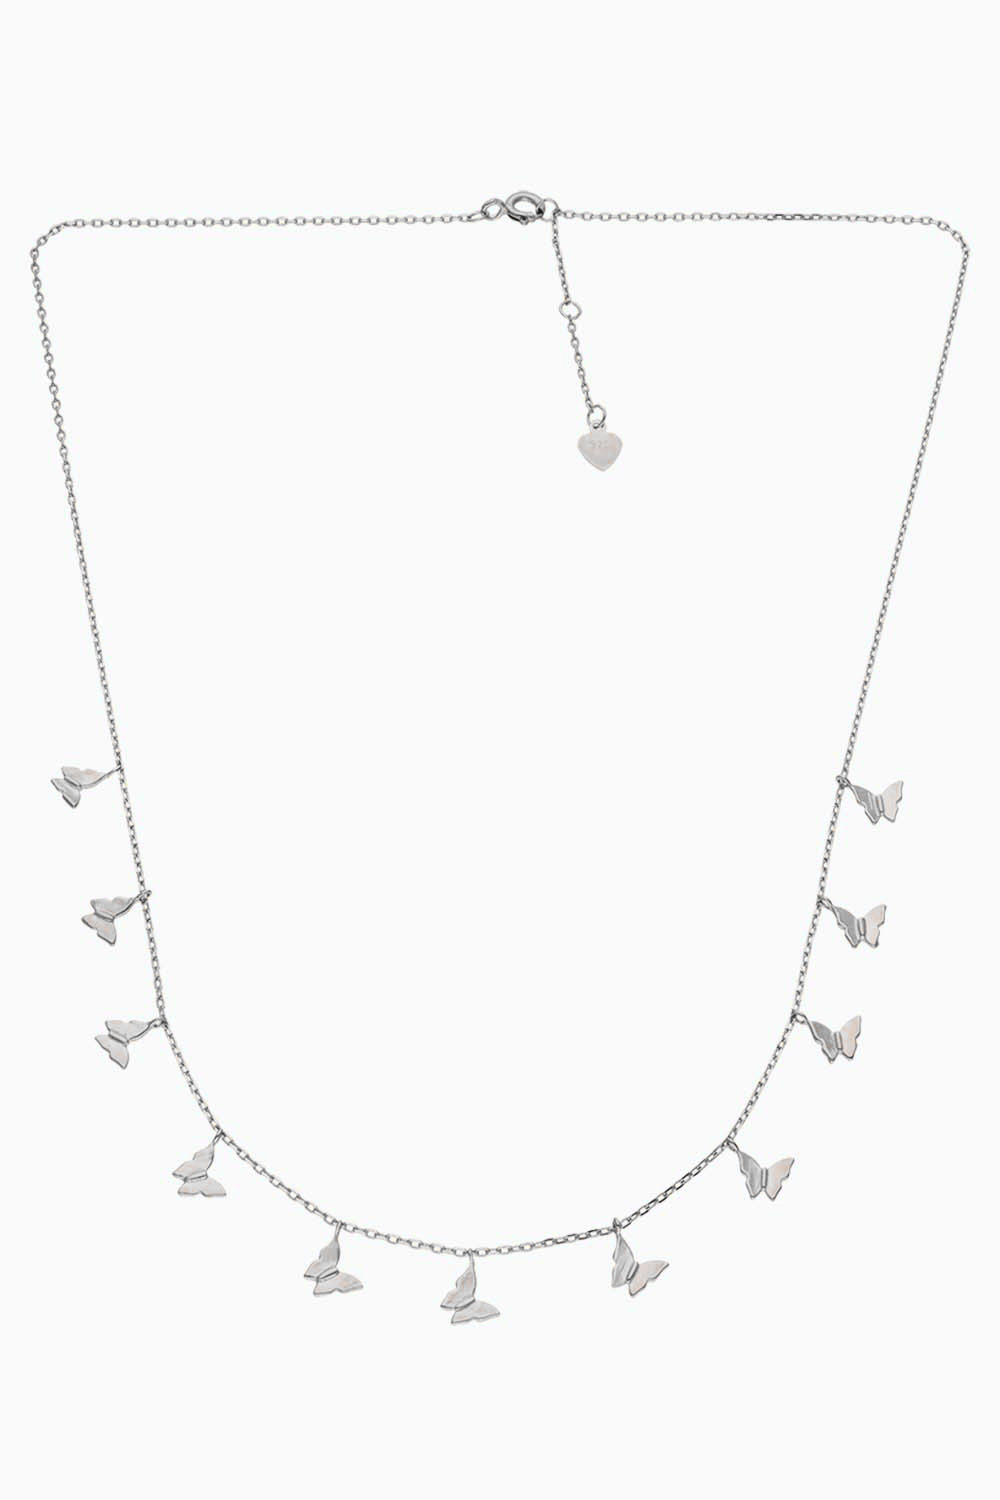 Dancing Silver Butterflies Casual Silver Necklace